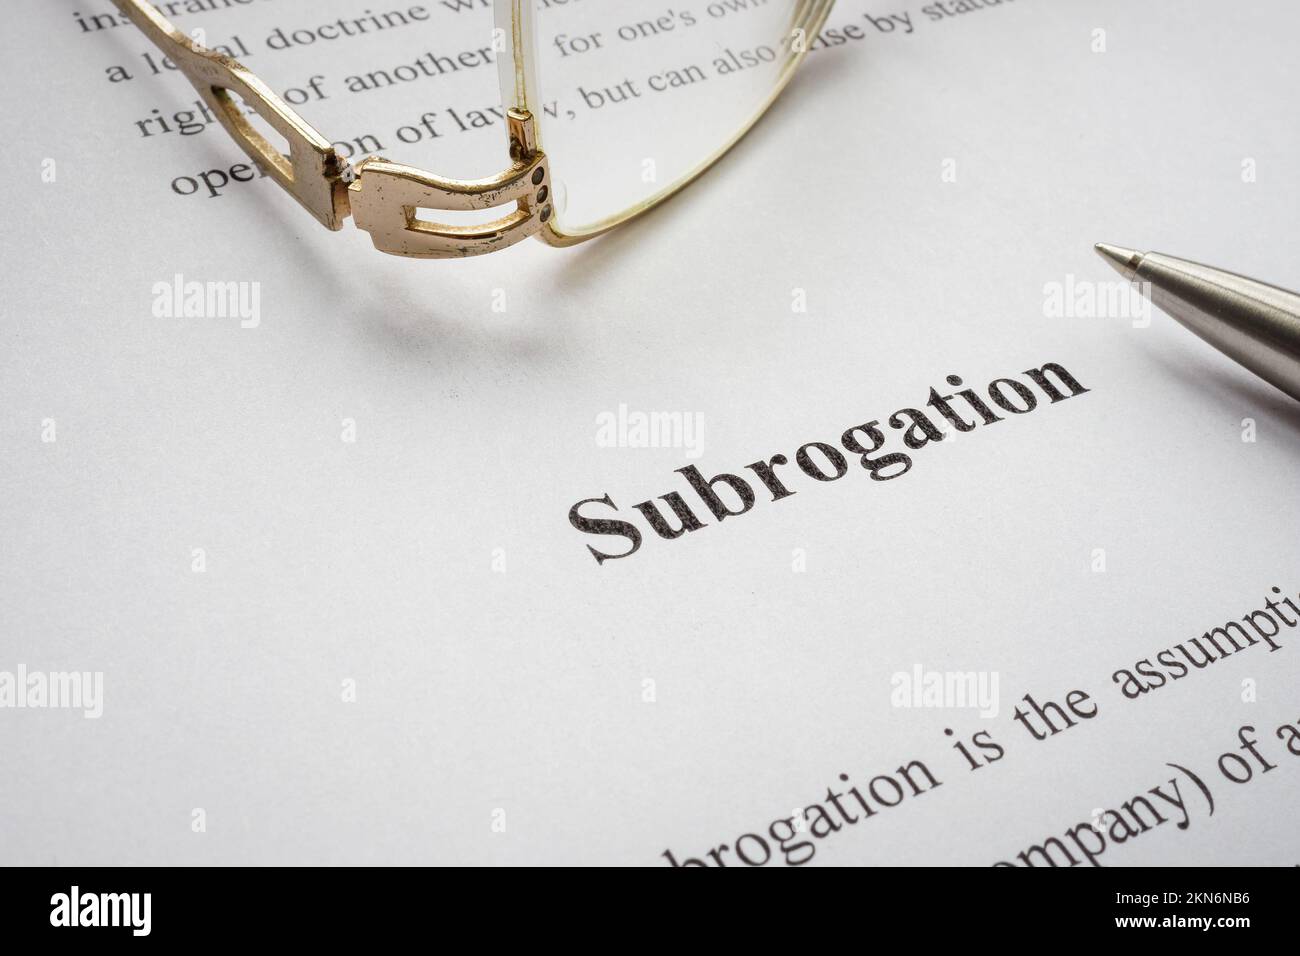 Page with info about subrogation and old glasses. Stock Photo